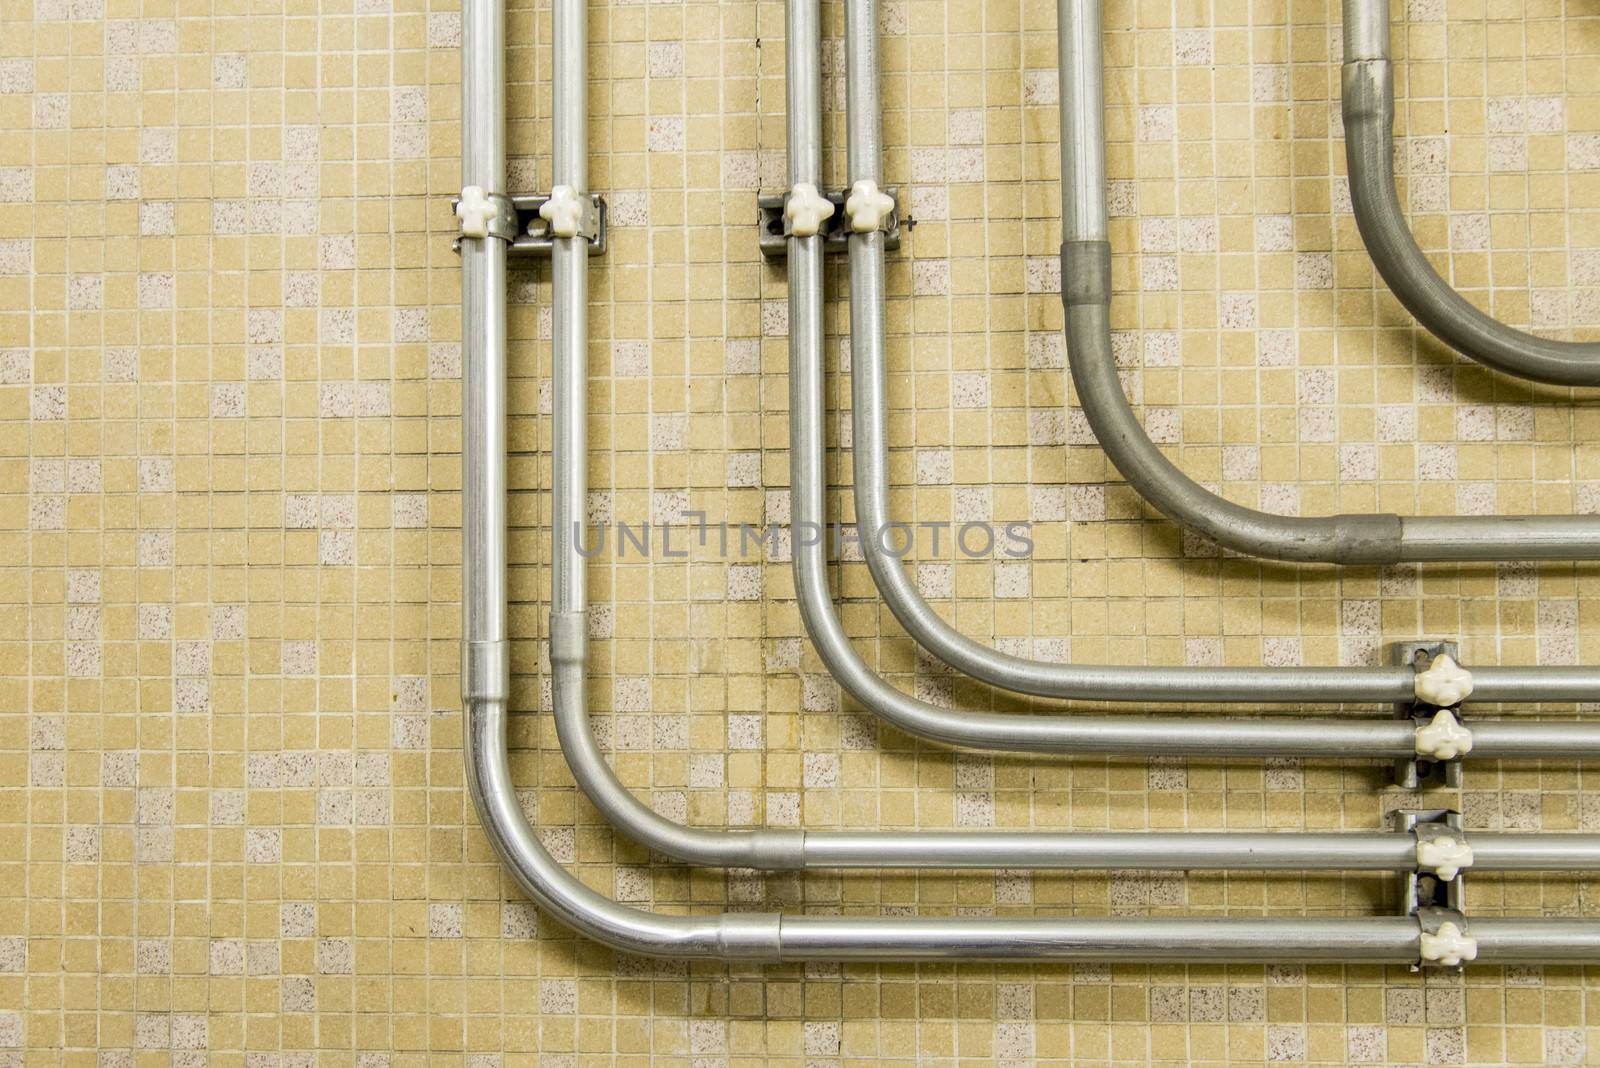 Piping connector on the wall